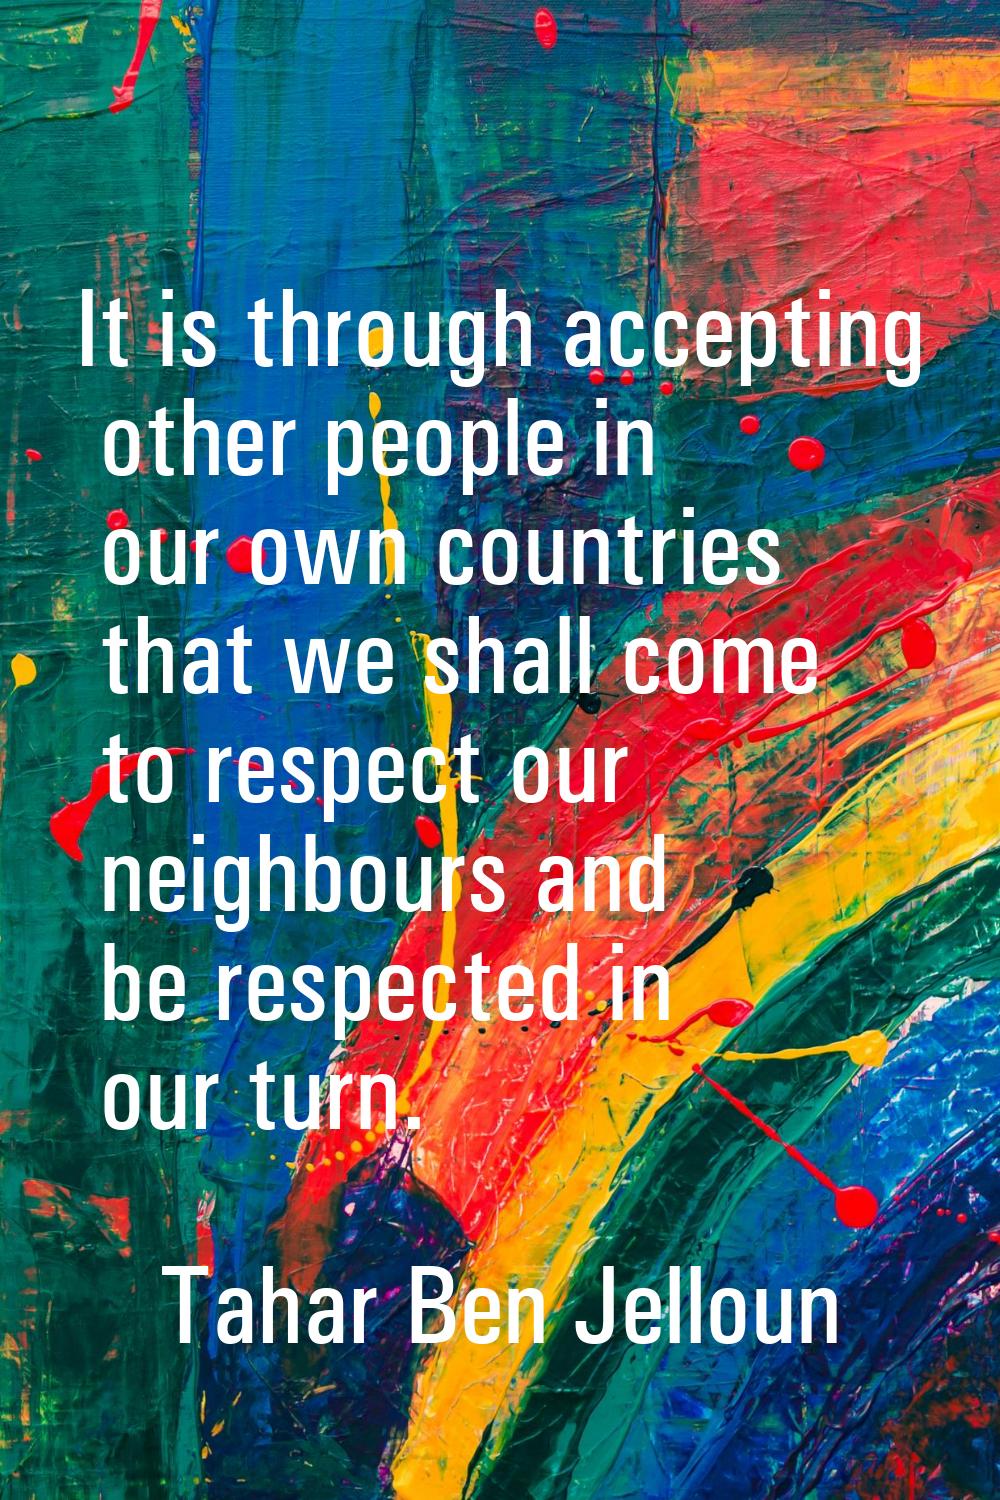 It is through accepting other people in our own countries that we shall come to respect our neighbo